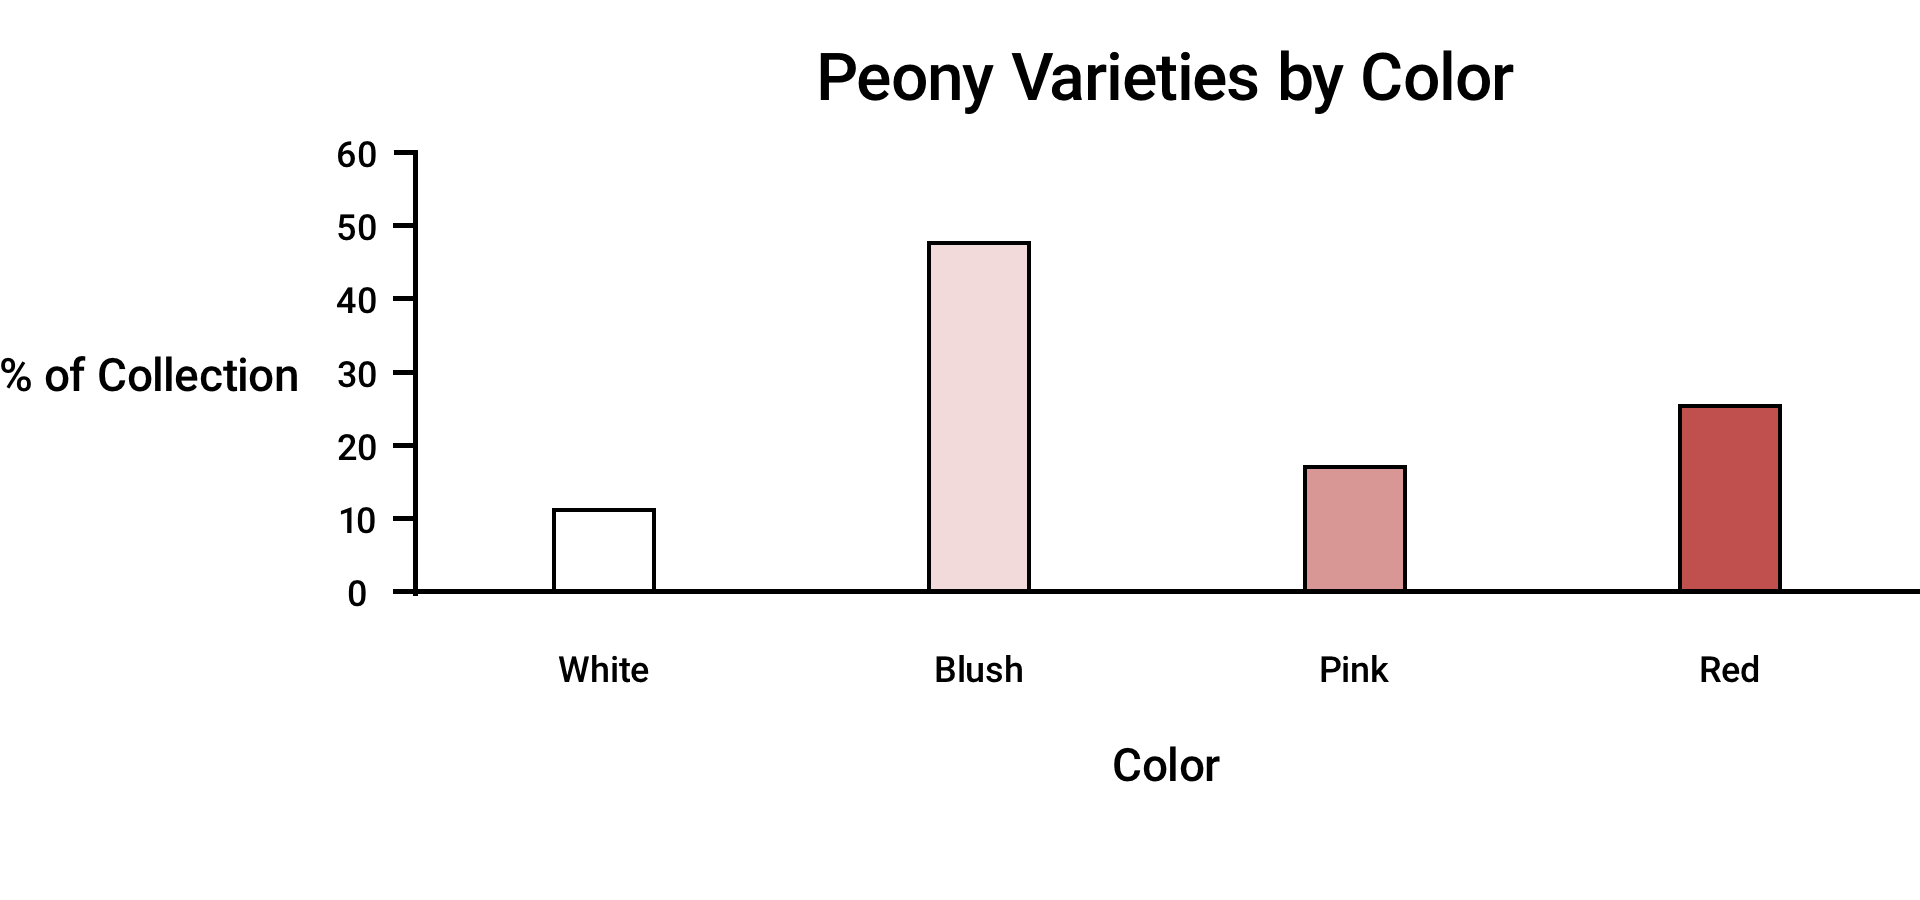 Bar chart comparing peony varieties by color